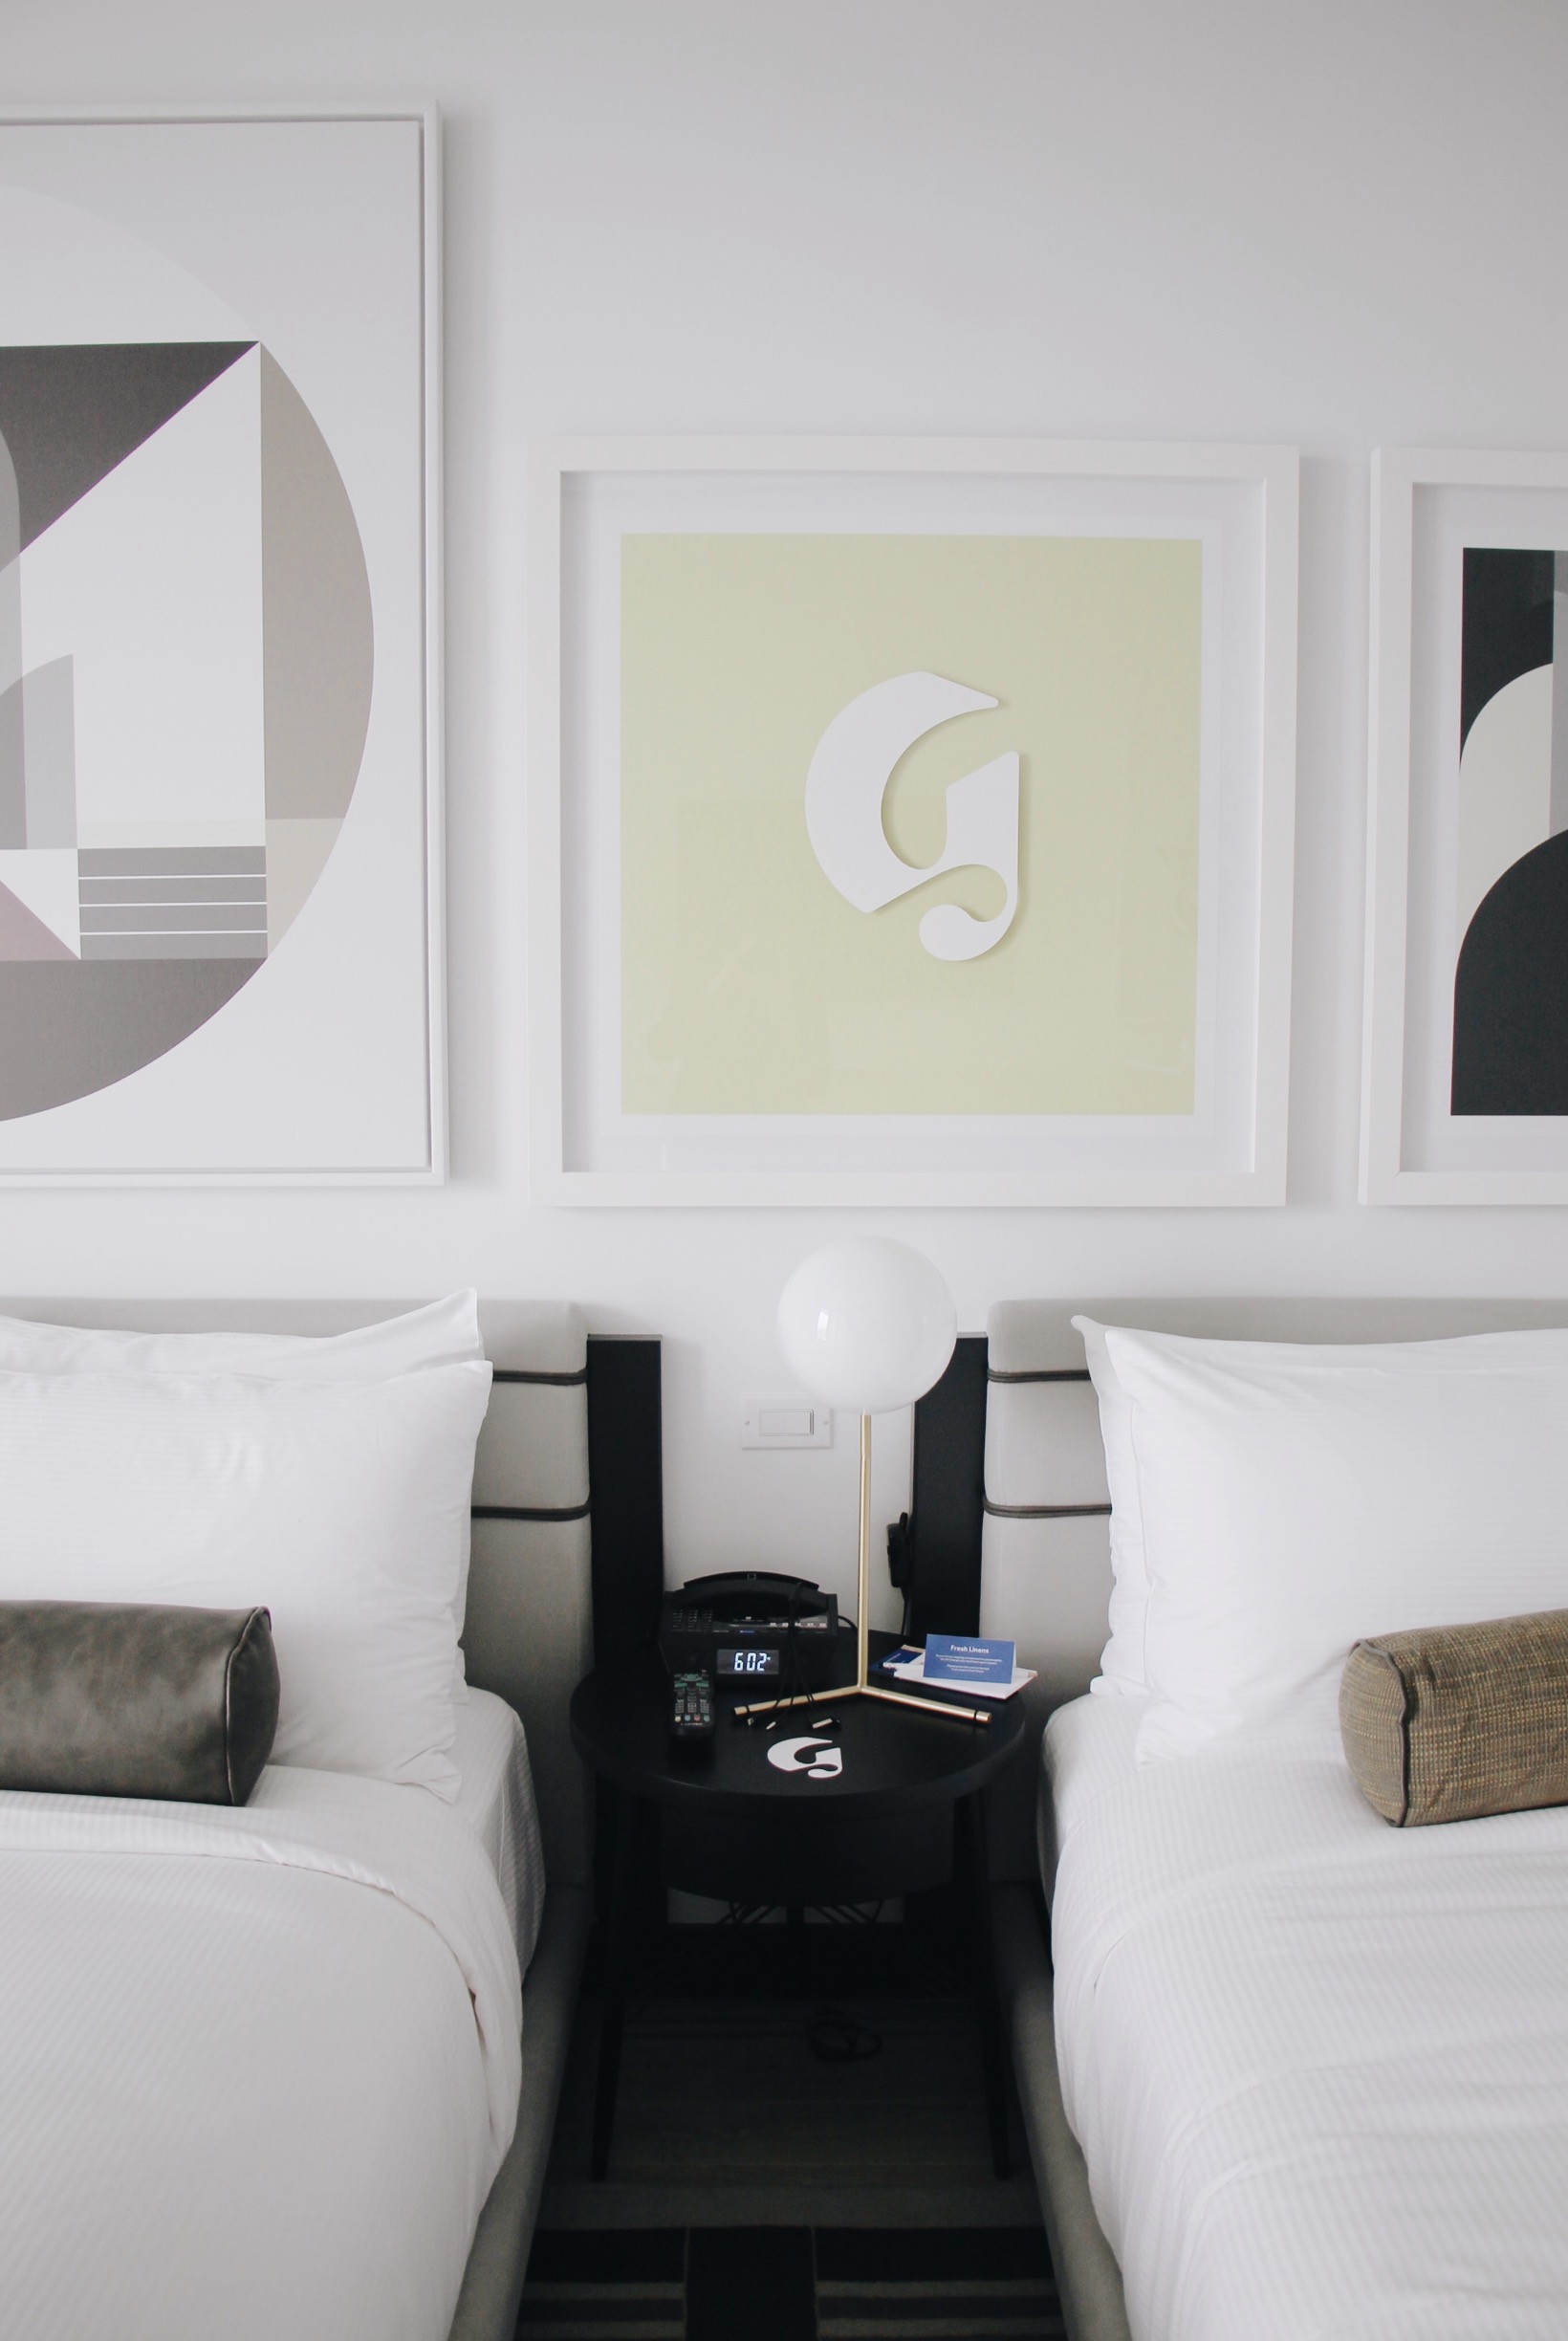 Glossier Rep Trip at The William Vale Hotel in Brooklyn, New York, Glossier Quarterly Rep Trip in NYC, Glossier Rep, Glossier Brand Rep, Glossier, William Vale Hotel, Glossier Rep Trip